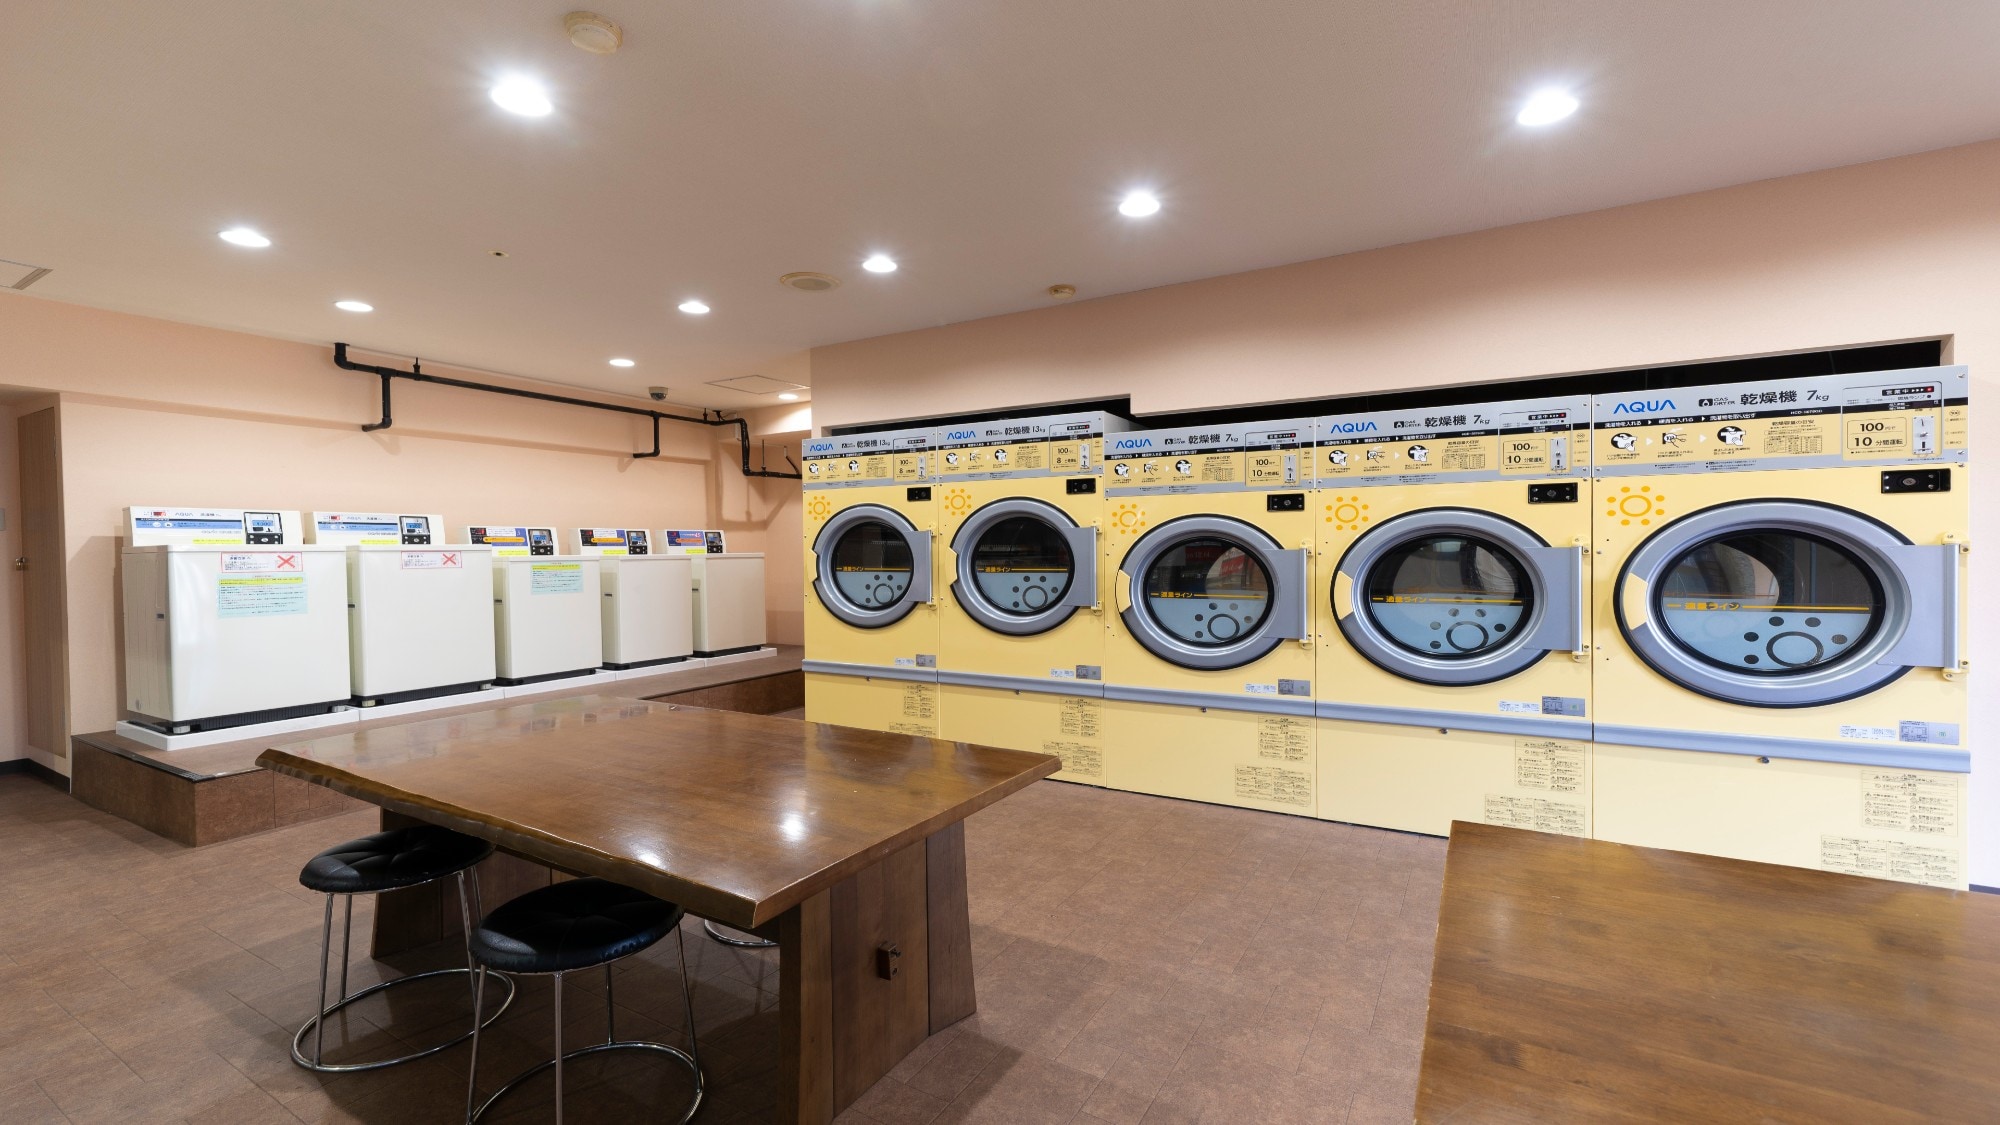 Facilities ｜ Coin laundry (complete with washing machine and dryer)